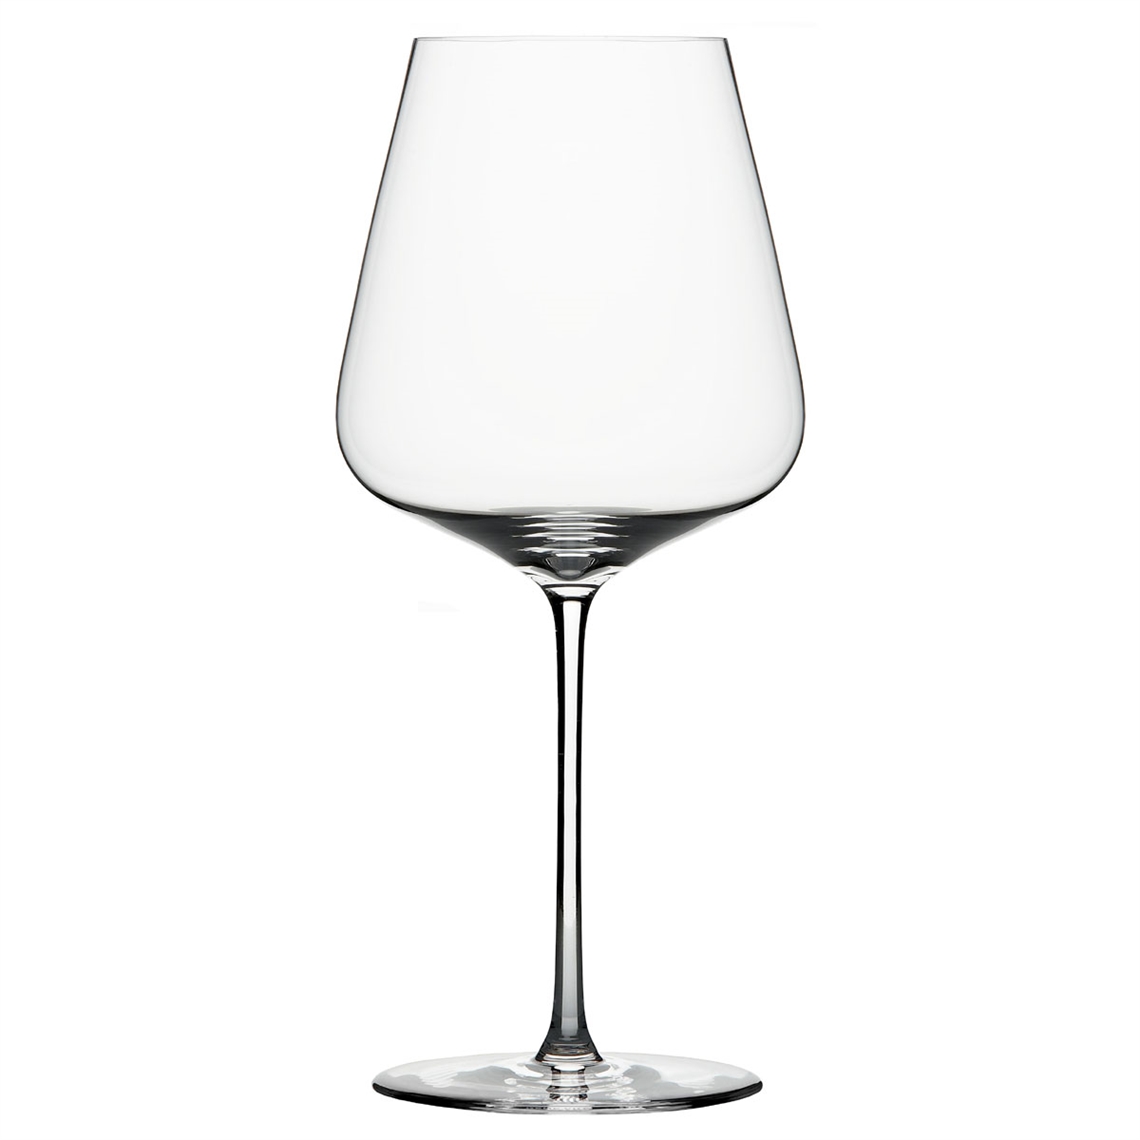 View more stolzle from our Premium Mouth Blown Glassware range